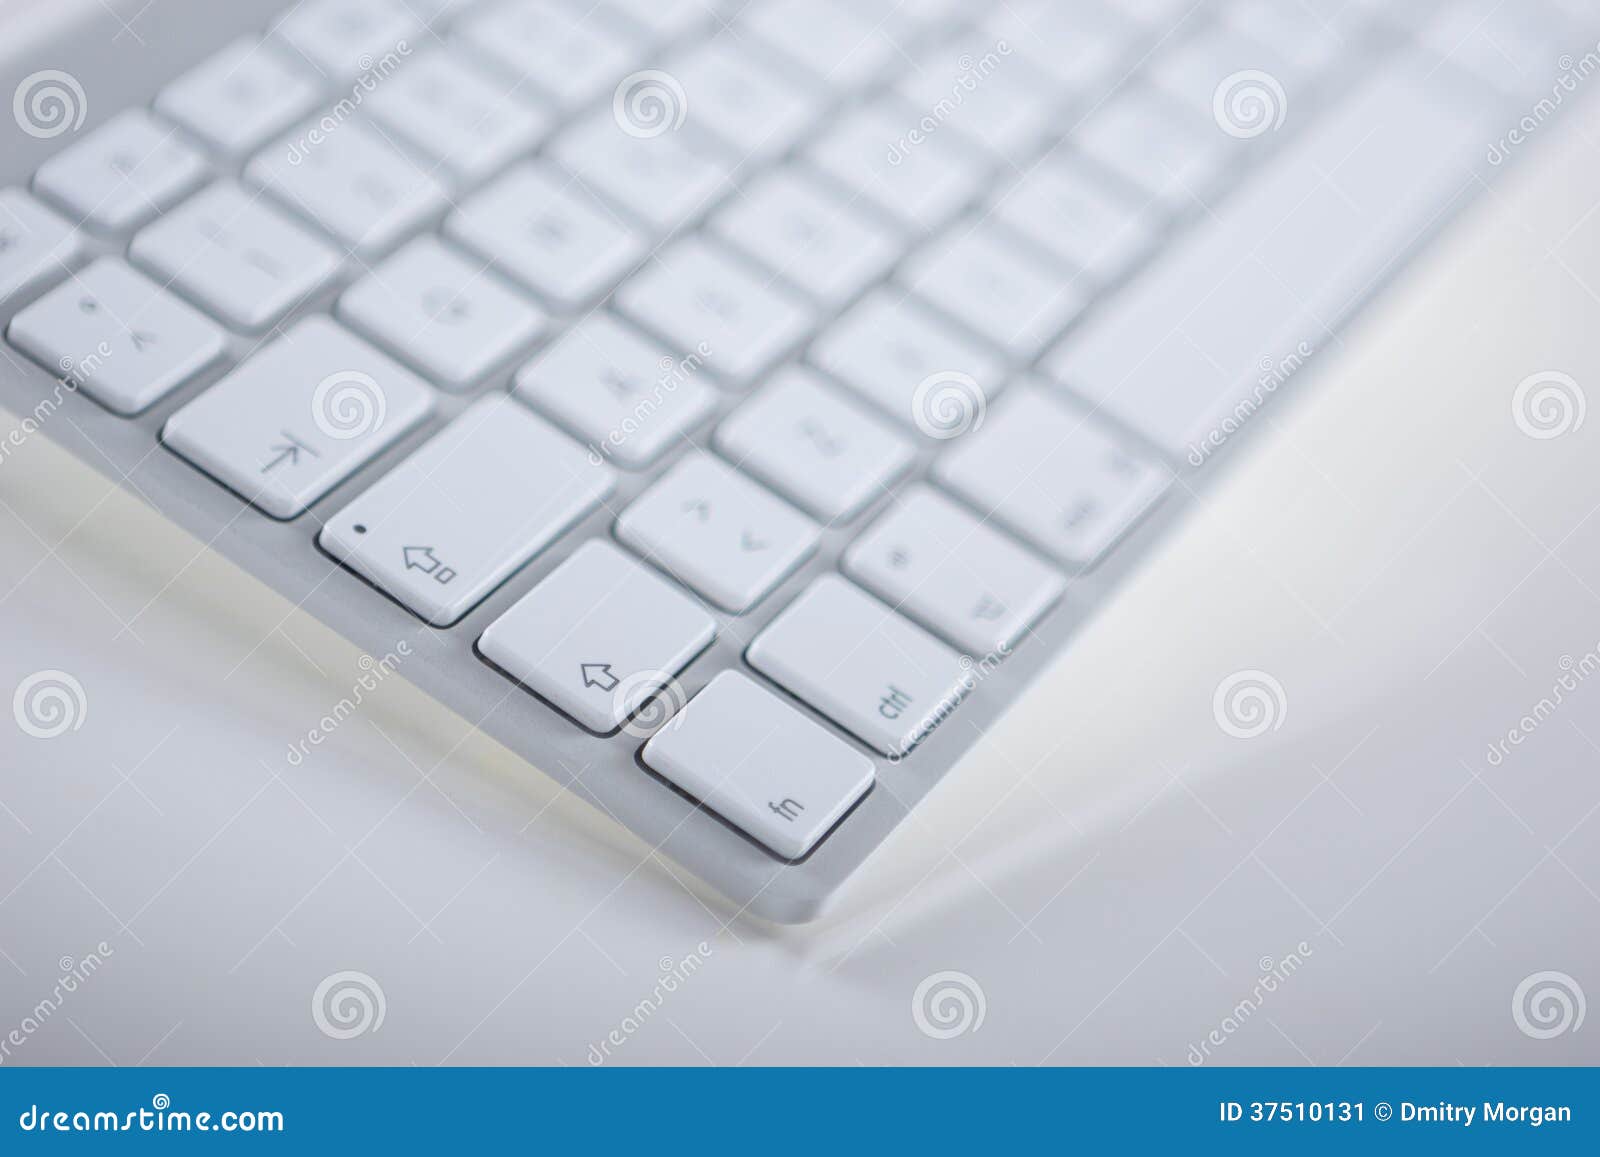 partial view of a computer keyboard